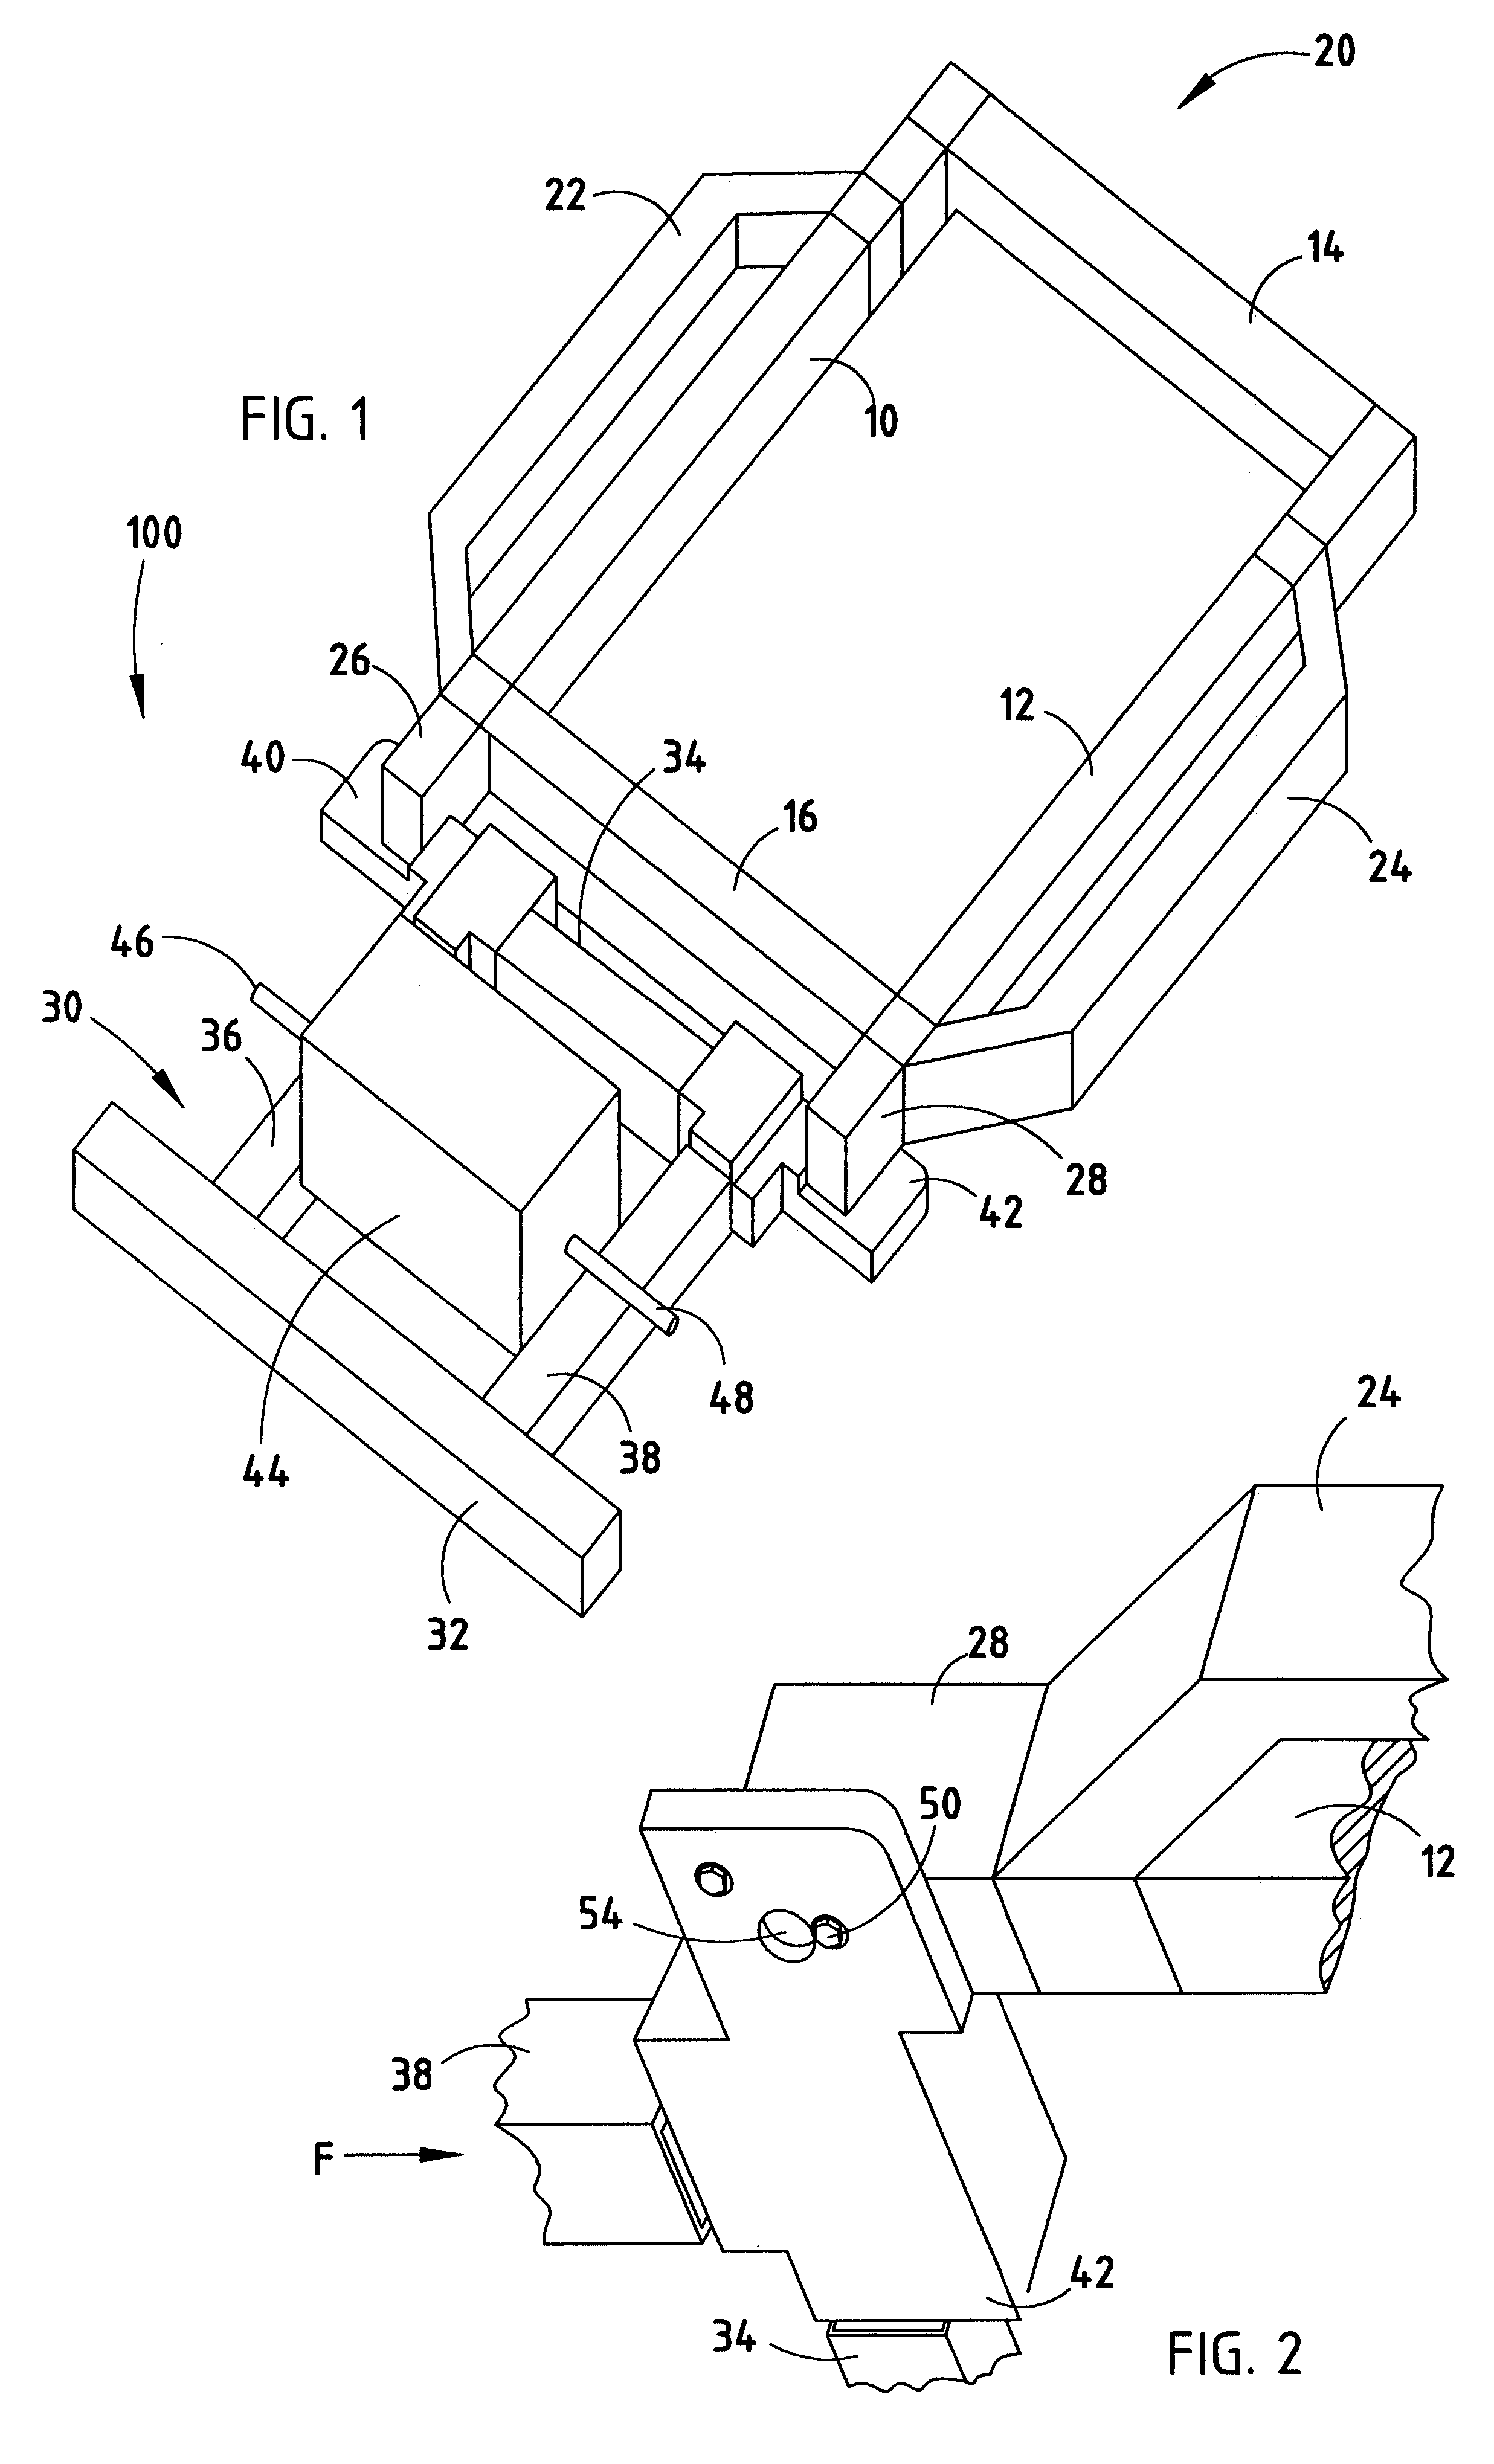 Energy management system and method for an extruded aluminum vehicle subframe